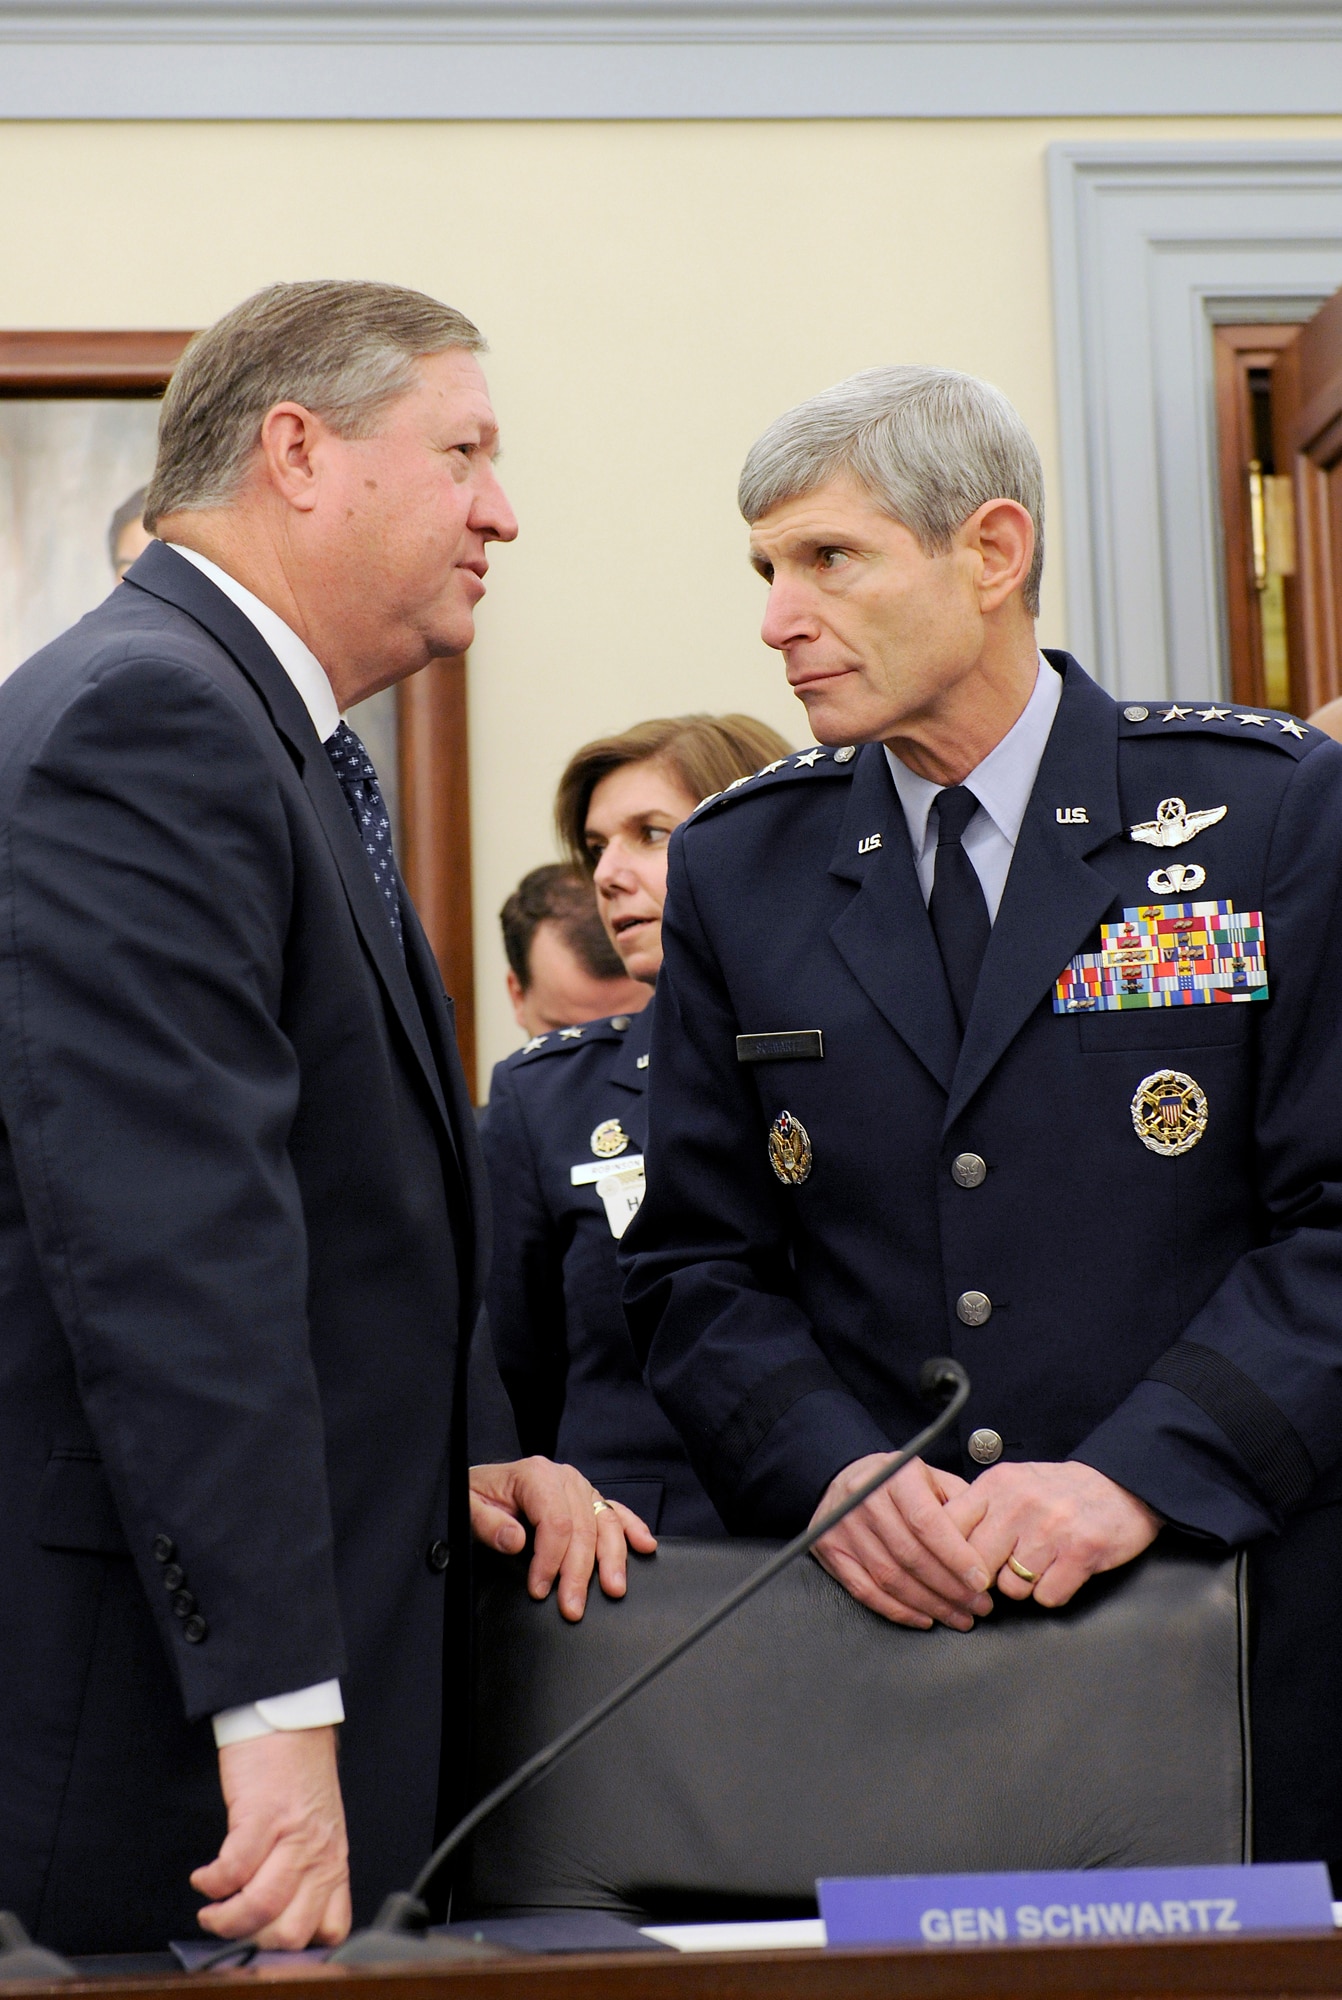 Secretary of the Air Force Michael Donley and Air Force Chief of Staff Gen.
Norton Schwartz talk prior to an Air Force budget hearing before the U.S.
House Appropriations Subcommittee on Defense on March 6, 2012, in Washington, D.C. (U.S. Air Force photo/Scott M. Ash)
